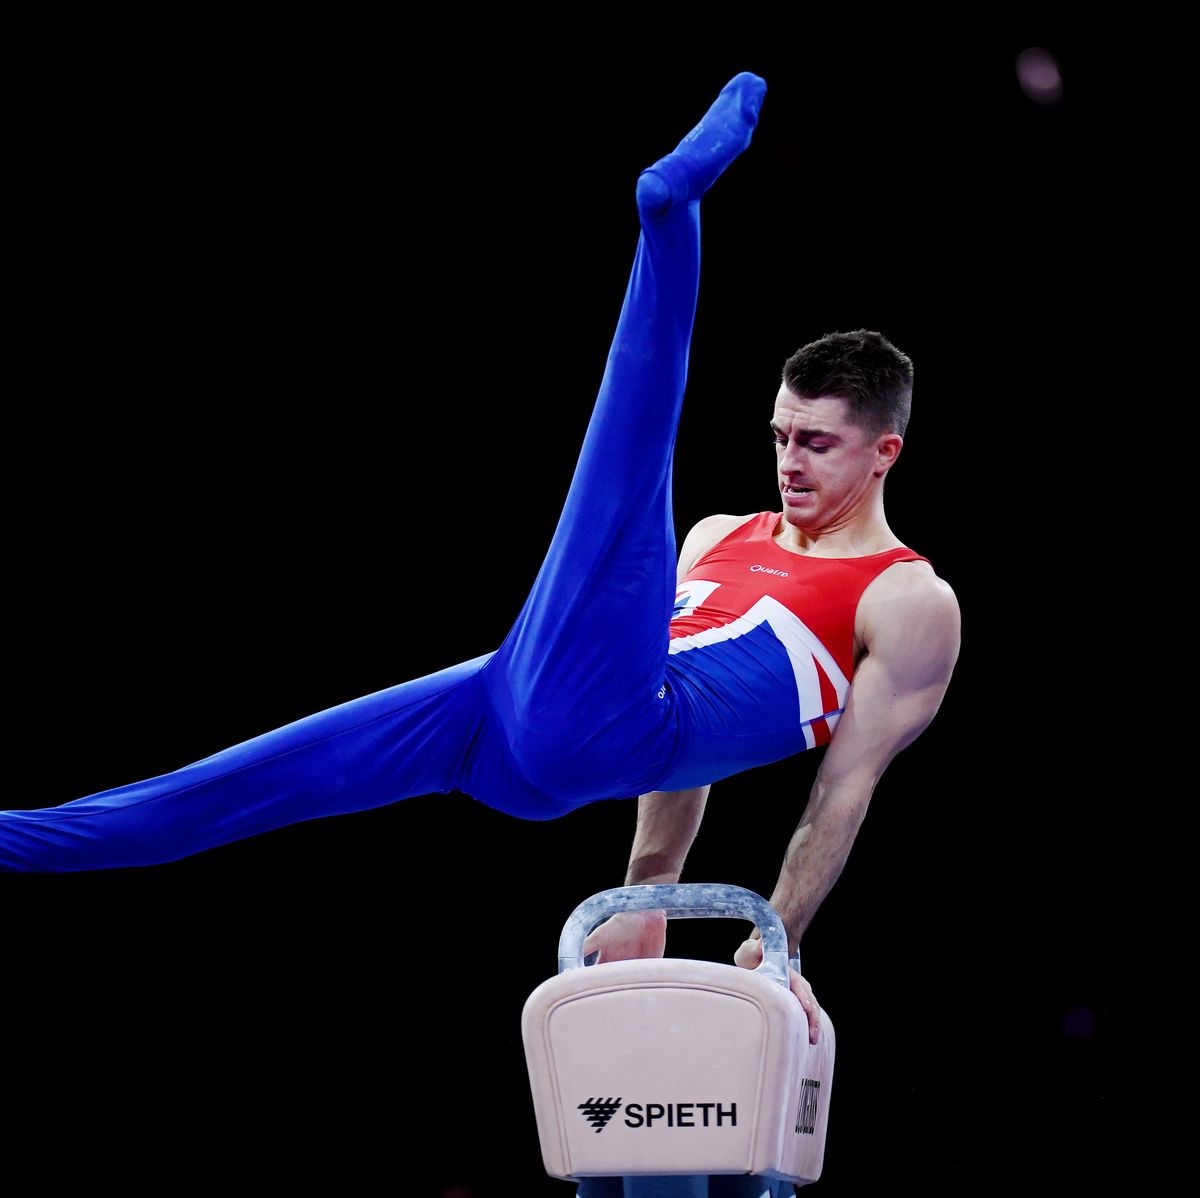 https://hips.hearstapps.com/hmg-prod/images/max-whitlock-of-great-britain-competes-in-mens-pommel-horse-news-photo-1627310132.jpg?crop=0.668xw:1.00xh;0.167xw,0&resize=1200:*